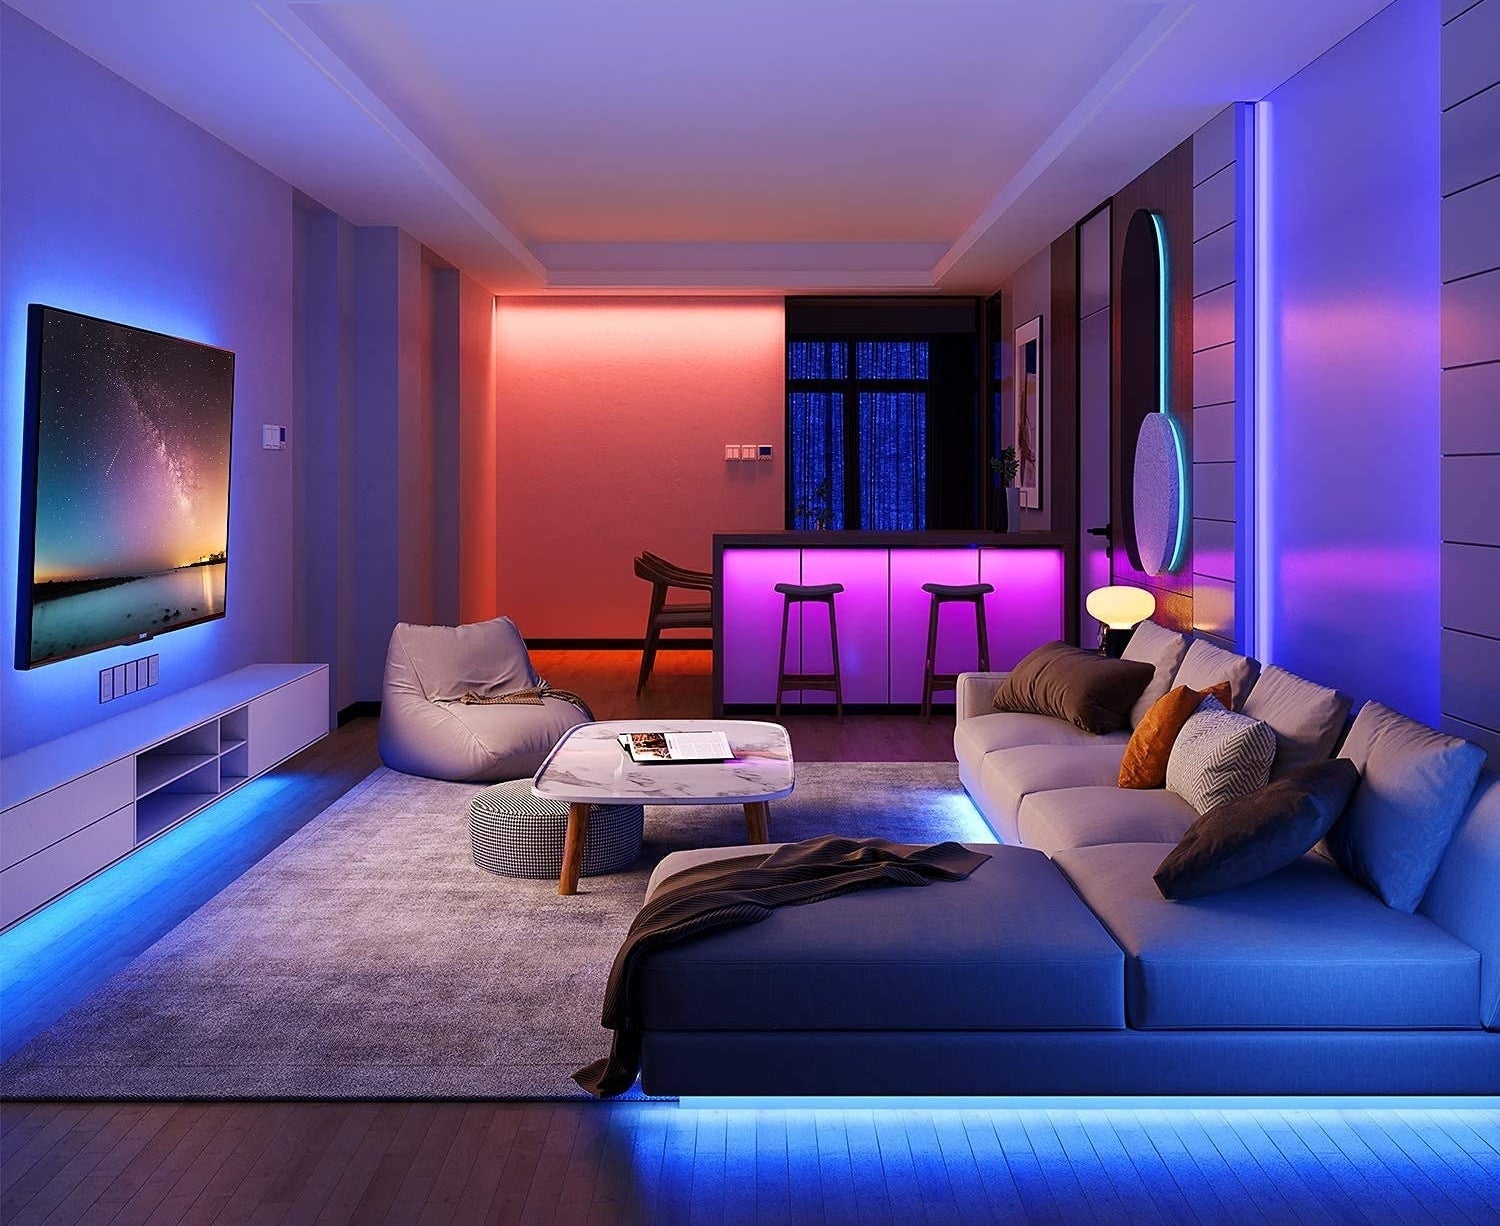 LED lights on the walls and floors of a living room